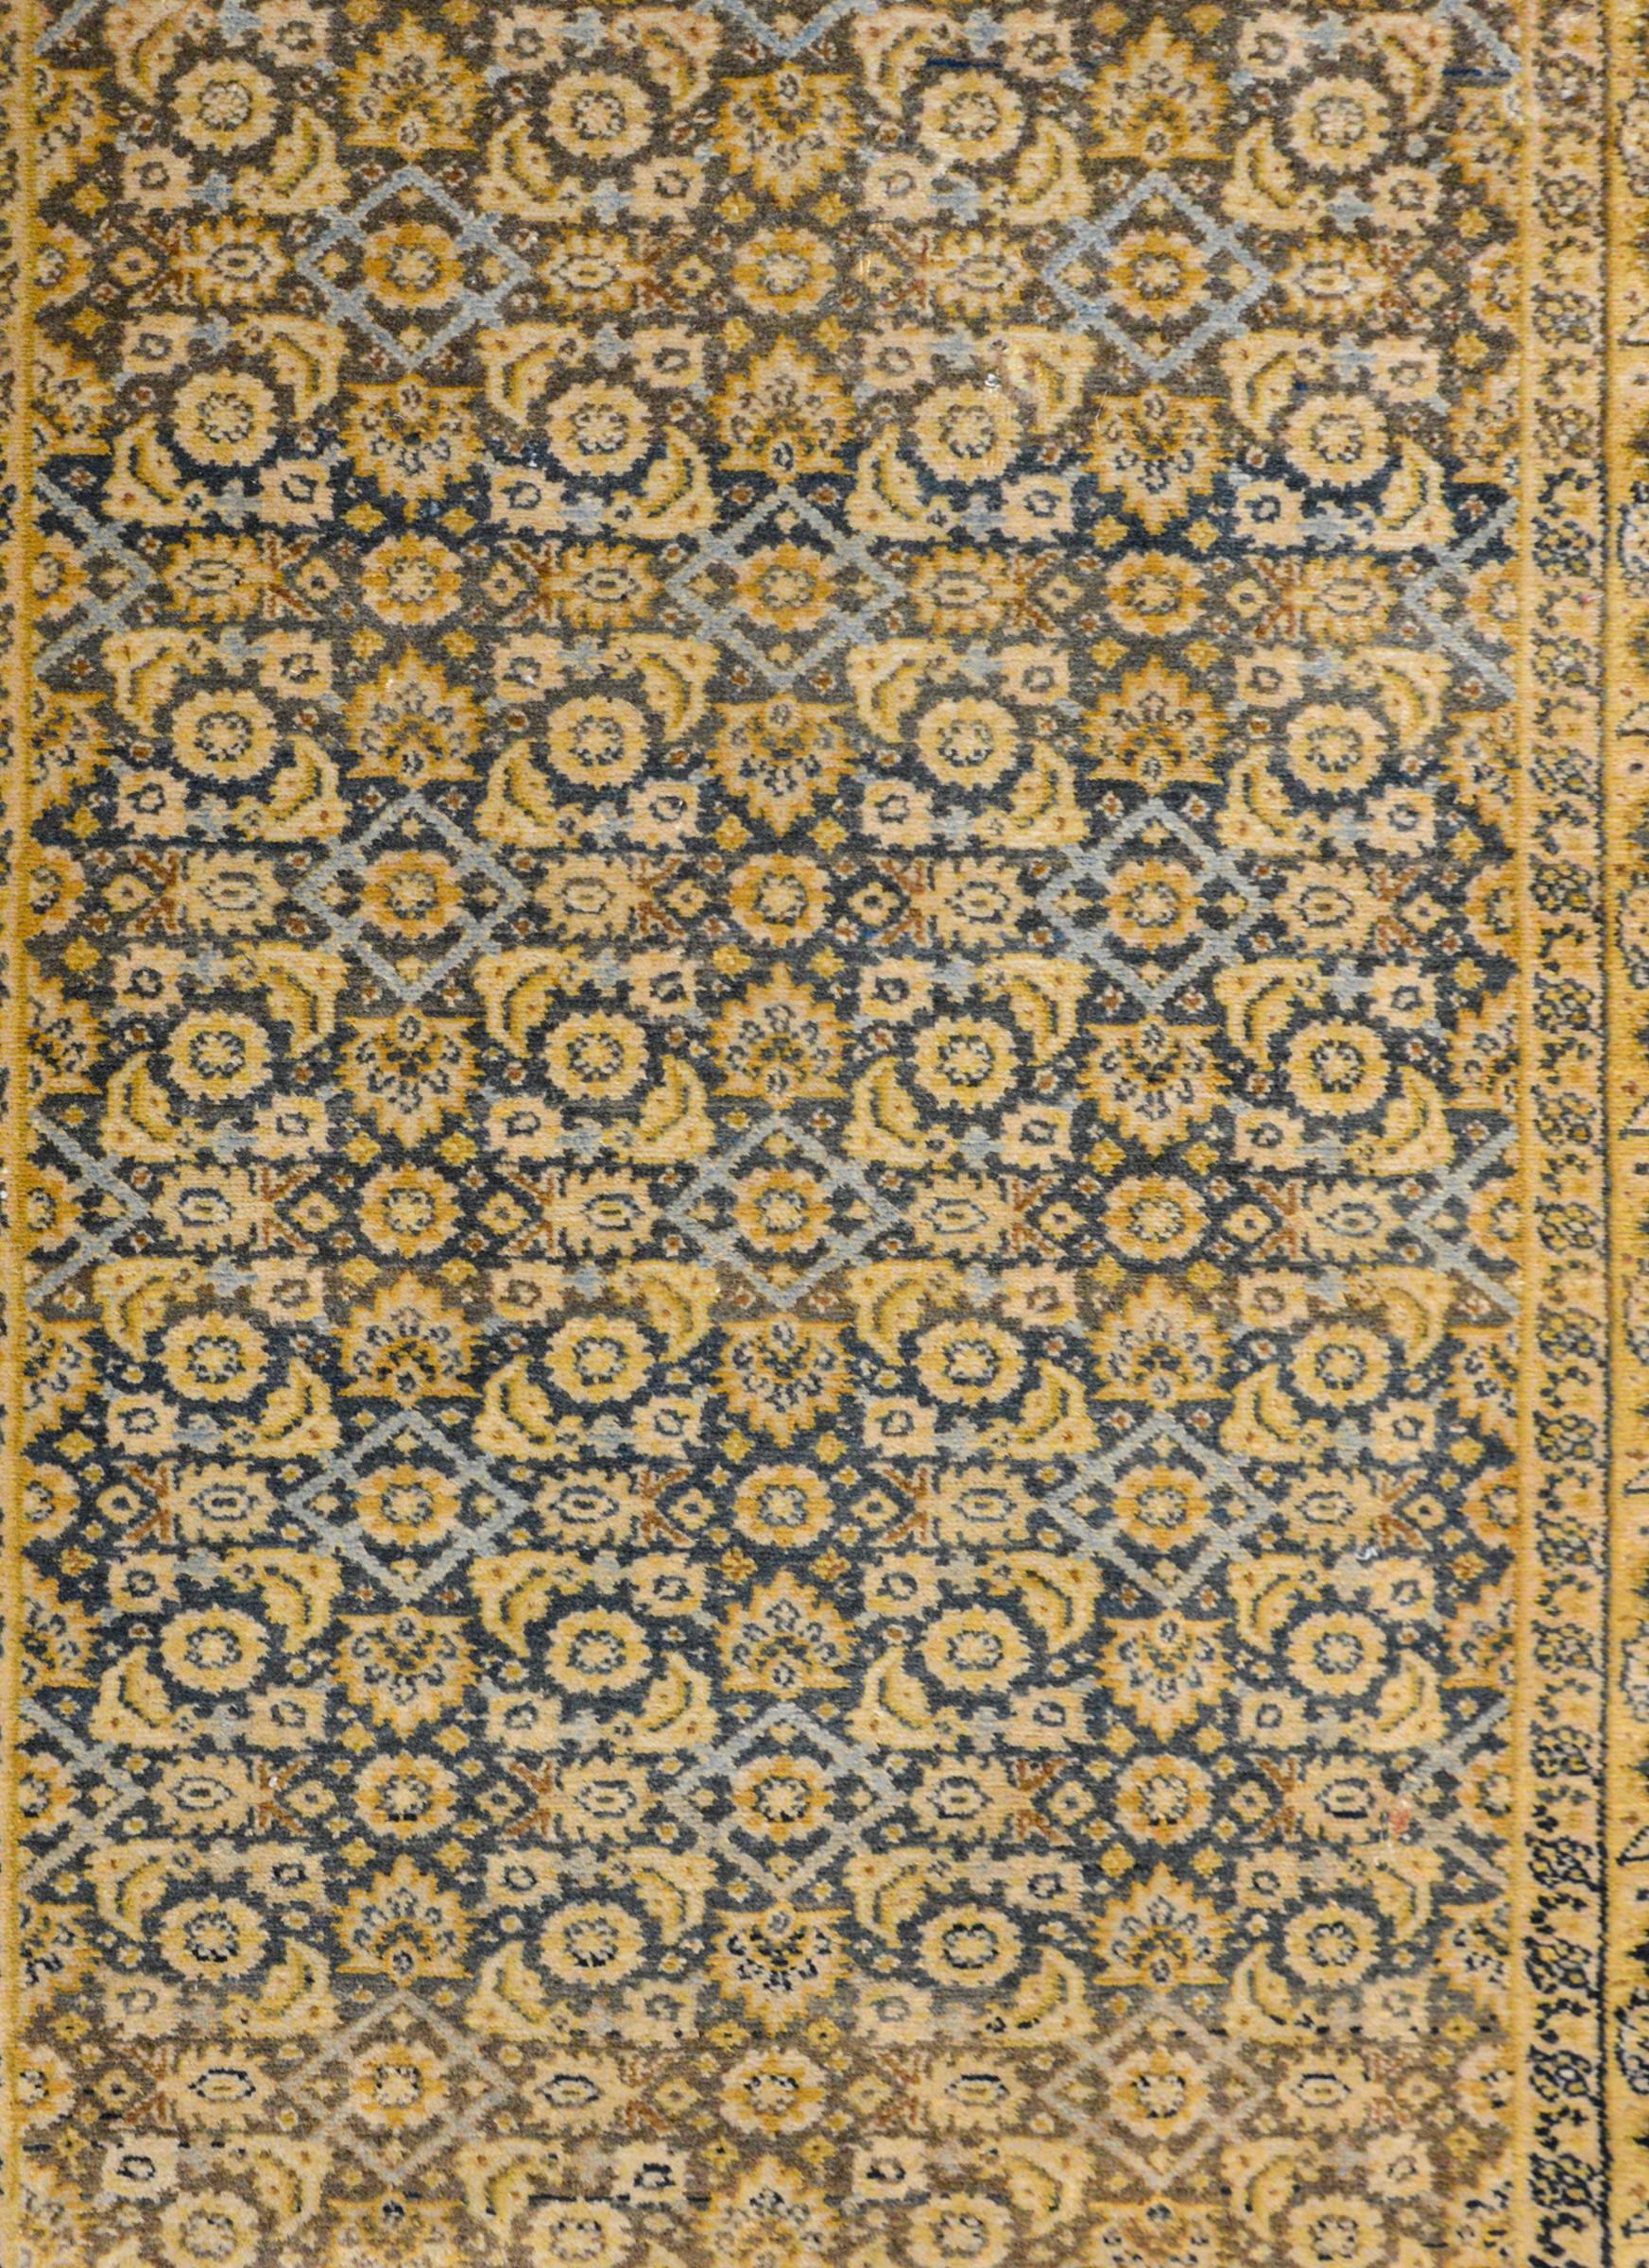 A beautiful early 20th century Persian Senneh rug with an all-over trellis pattern containing flowers and leaves woven in gold, cream, and light indigo on a dark indigo background. The border is wide with a central leaf patterned stripe flanked by a